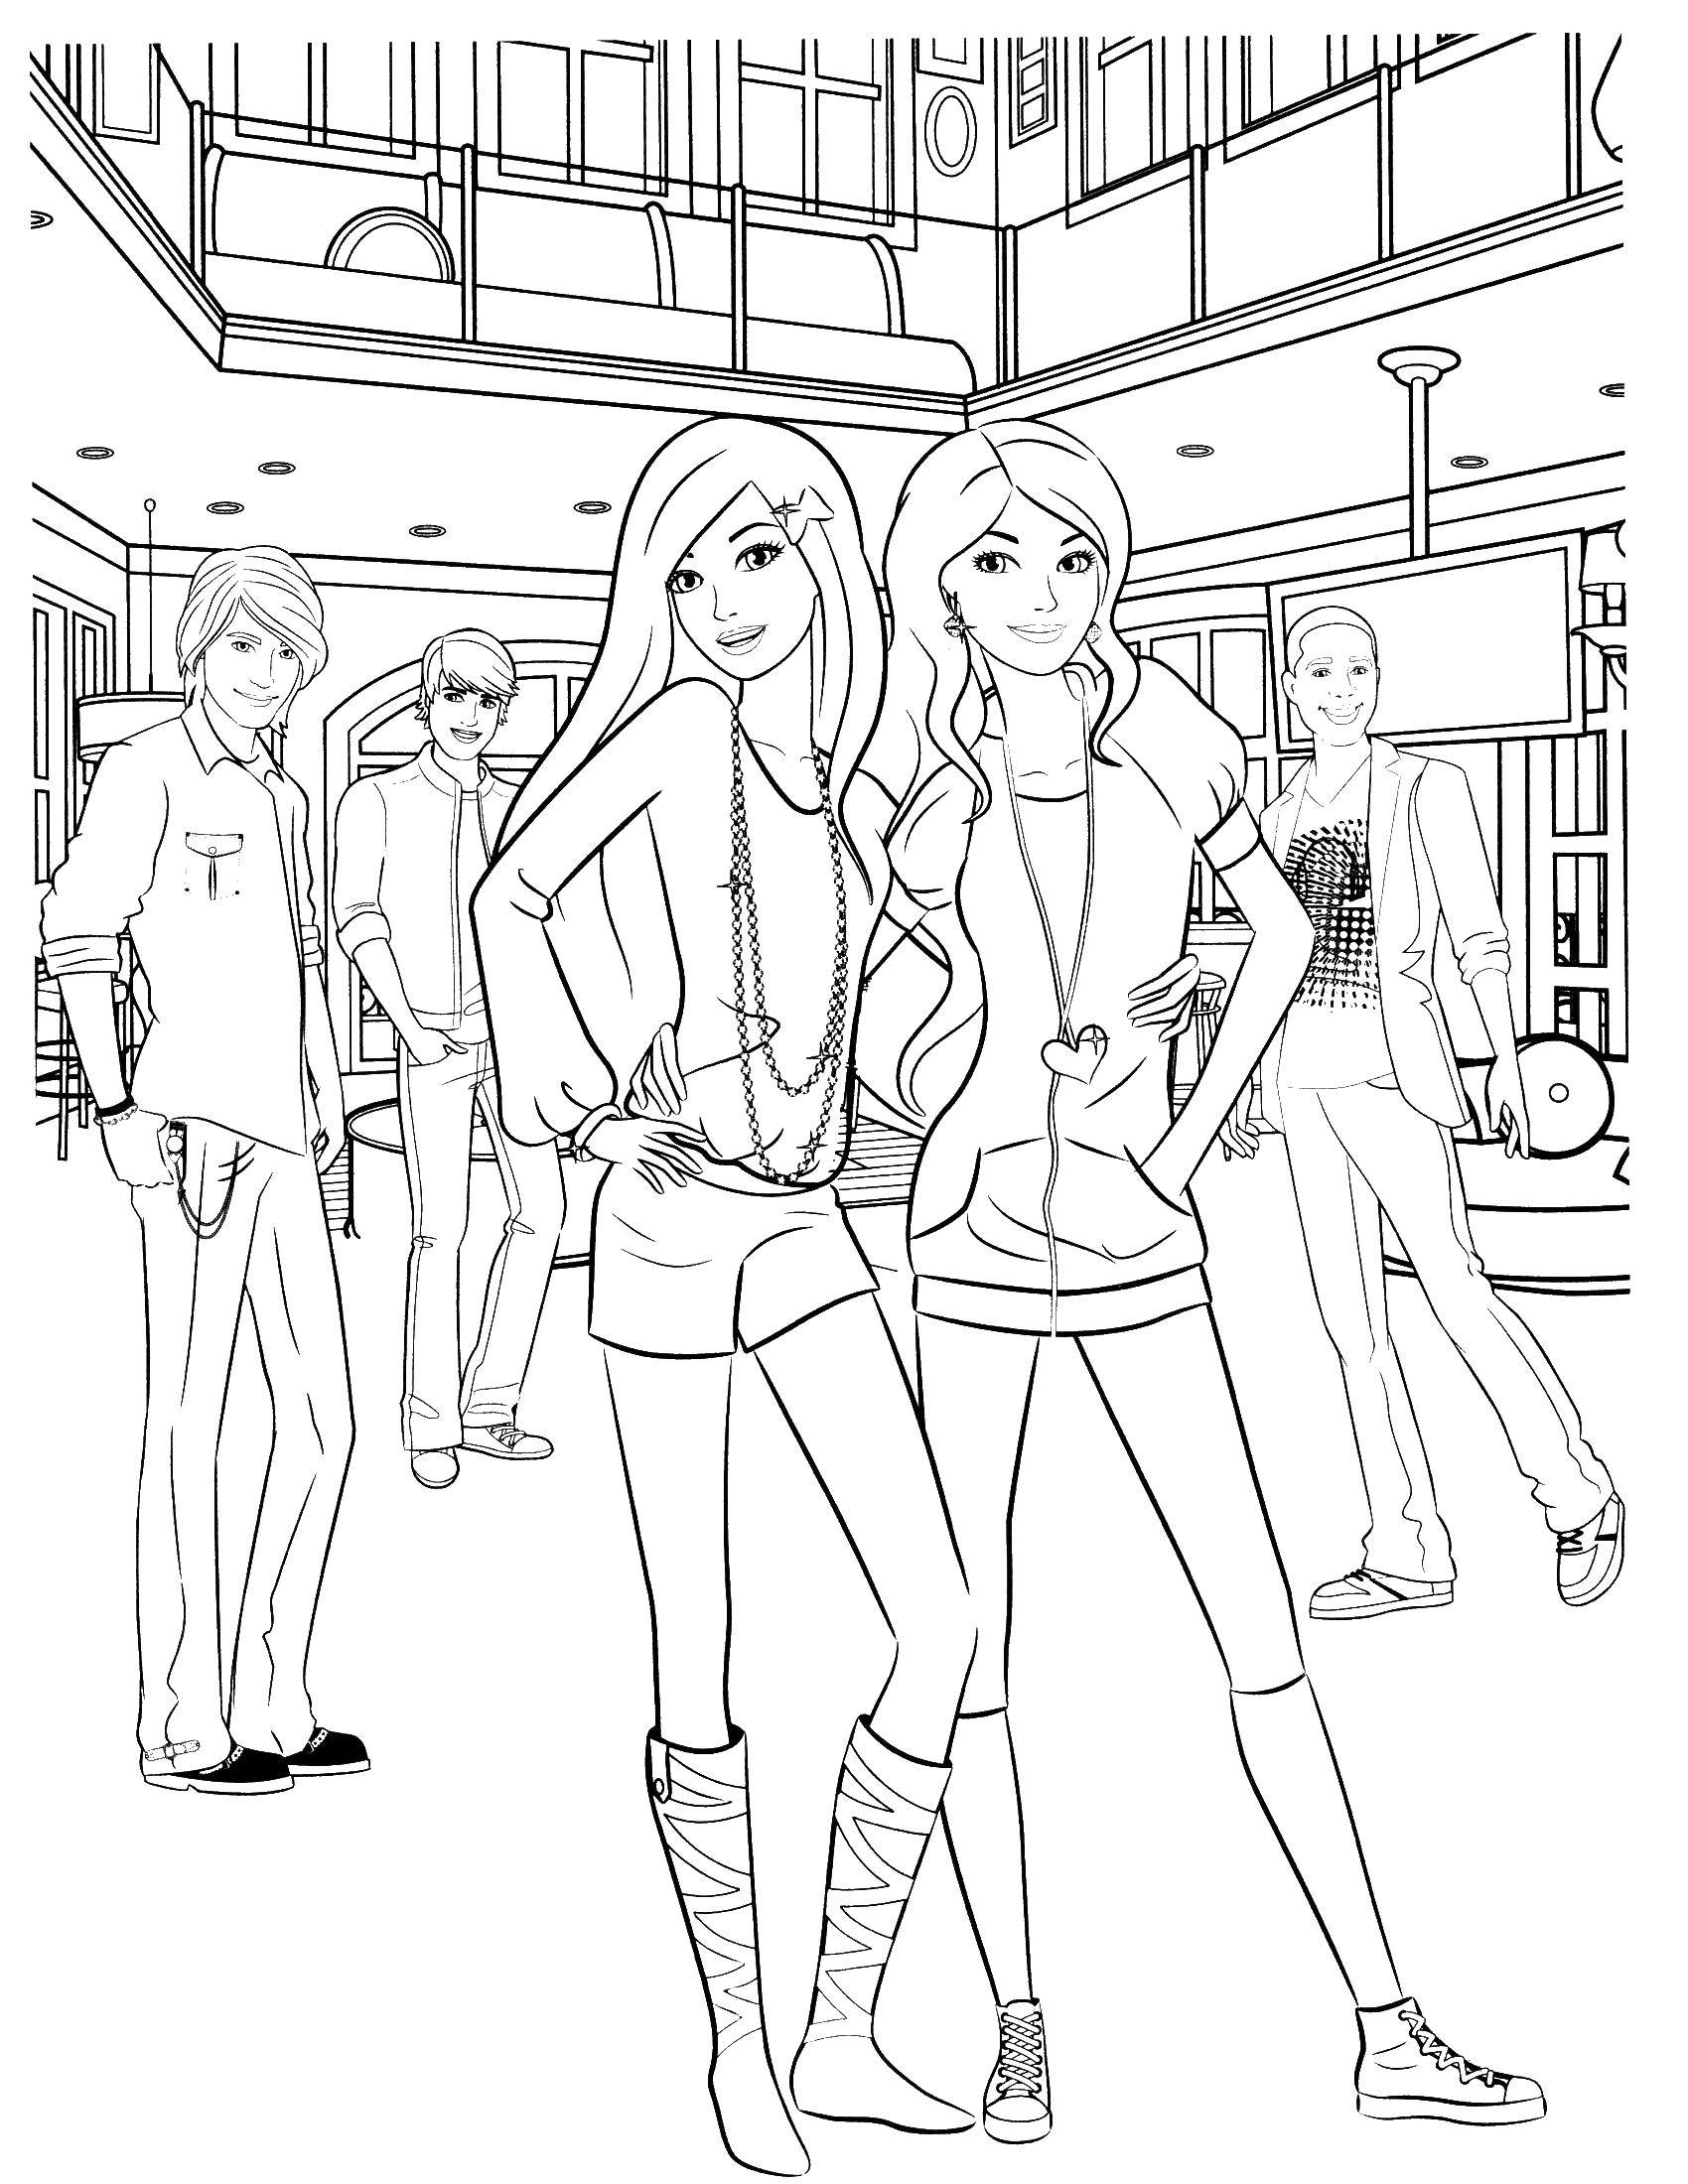 Coloring Barbie and her friends. Category Barbie . Tags:  Barbie , model.